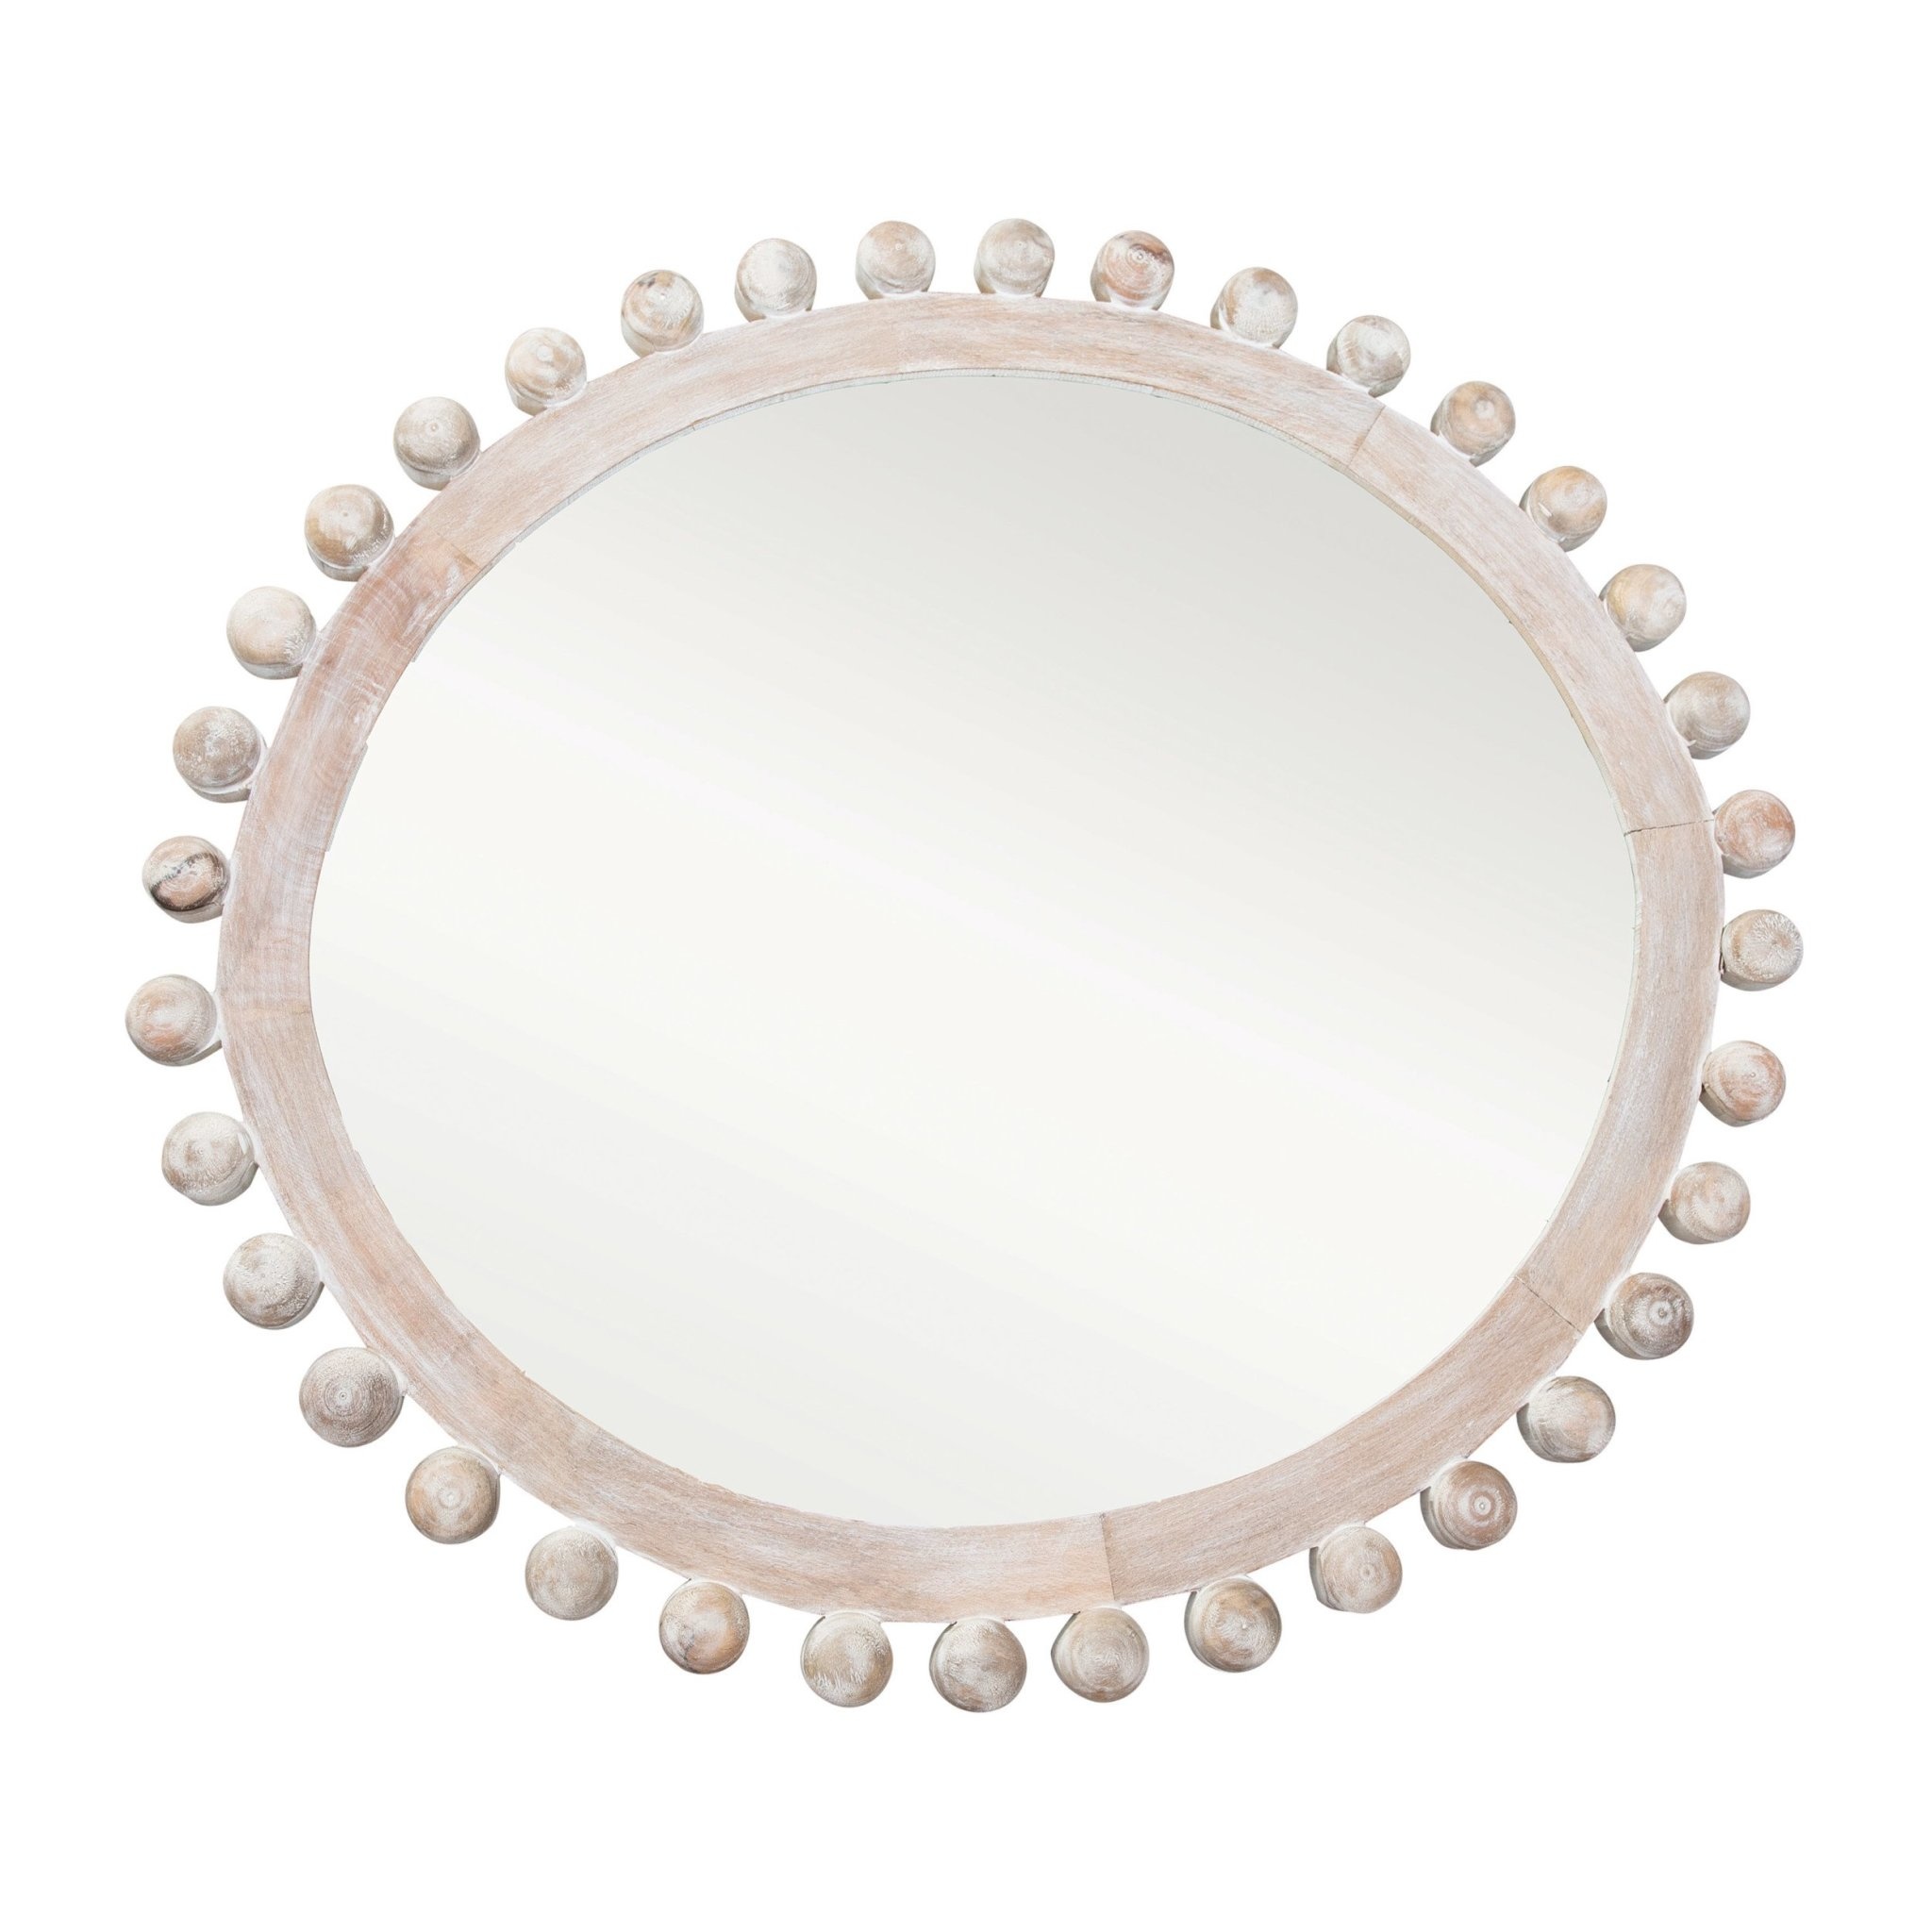 Ball Framed Wall Mirror, Whitewashed 38.5"x35", Available for local pick up